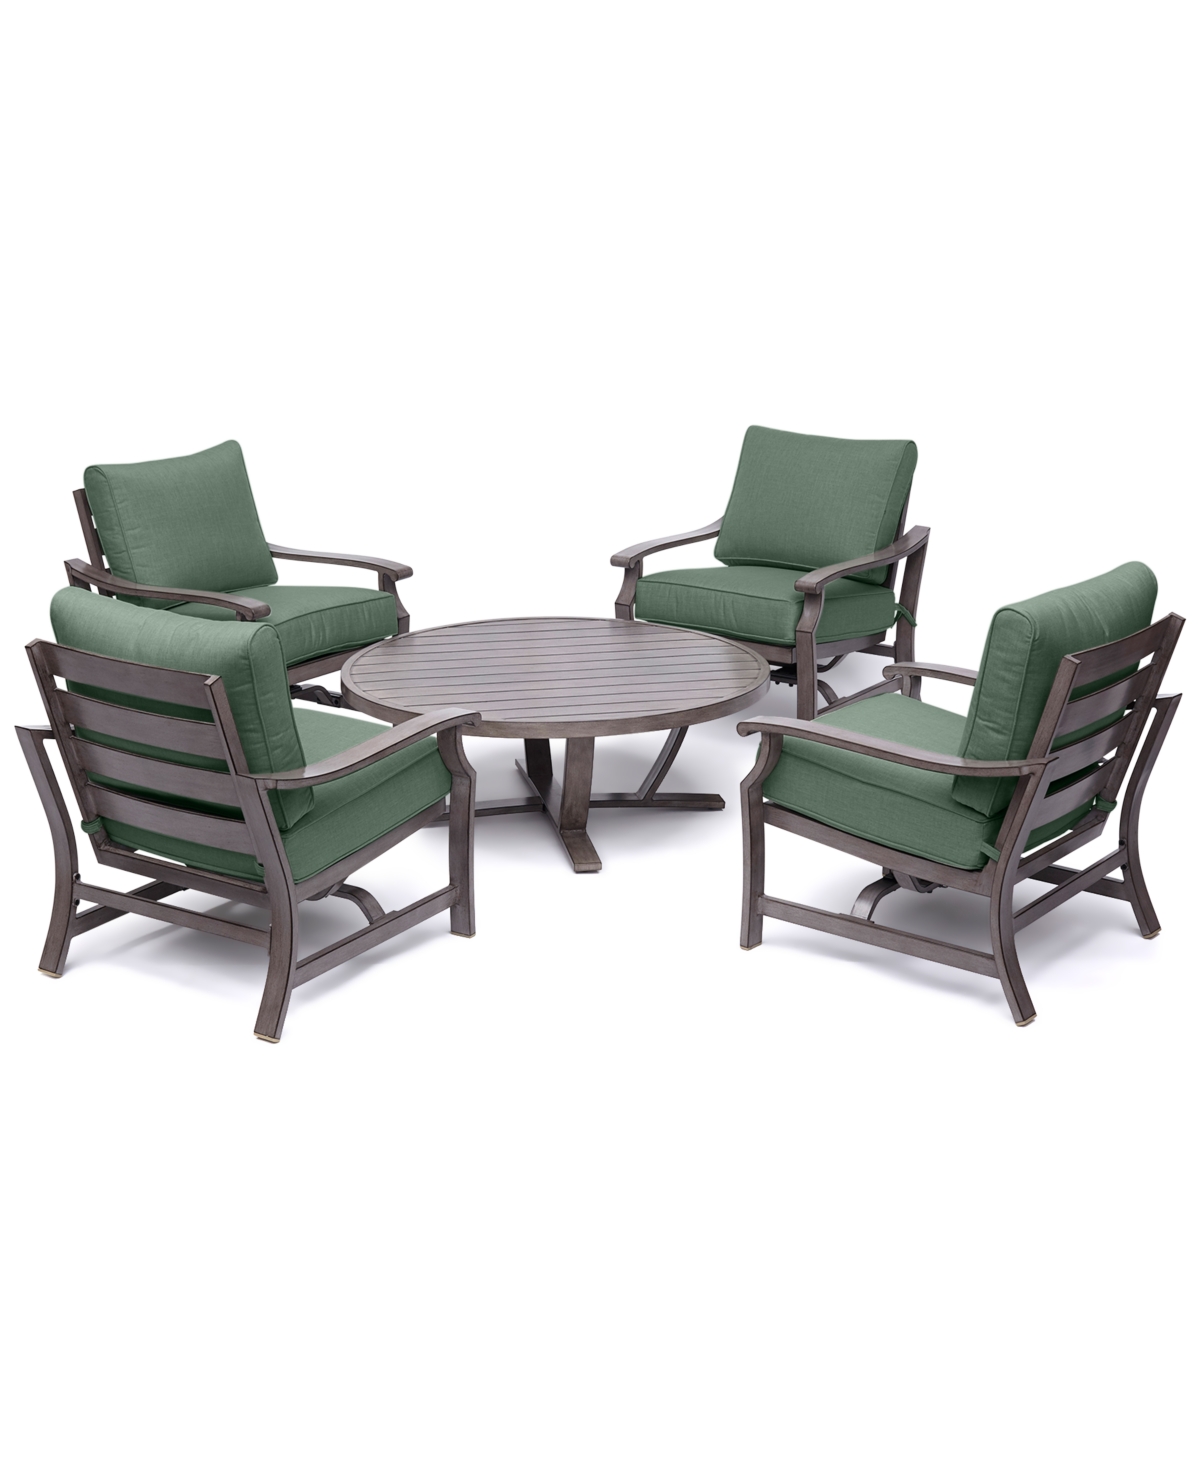 Shop Agio Tara Aluminum Outdoor 5-pc. Seating Set (48" Round Table & 4 Rocker Chairs), Created For Macy's In Outdura Grasshopper